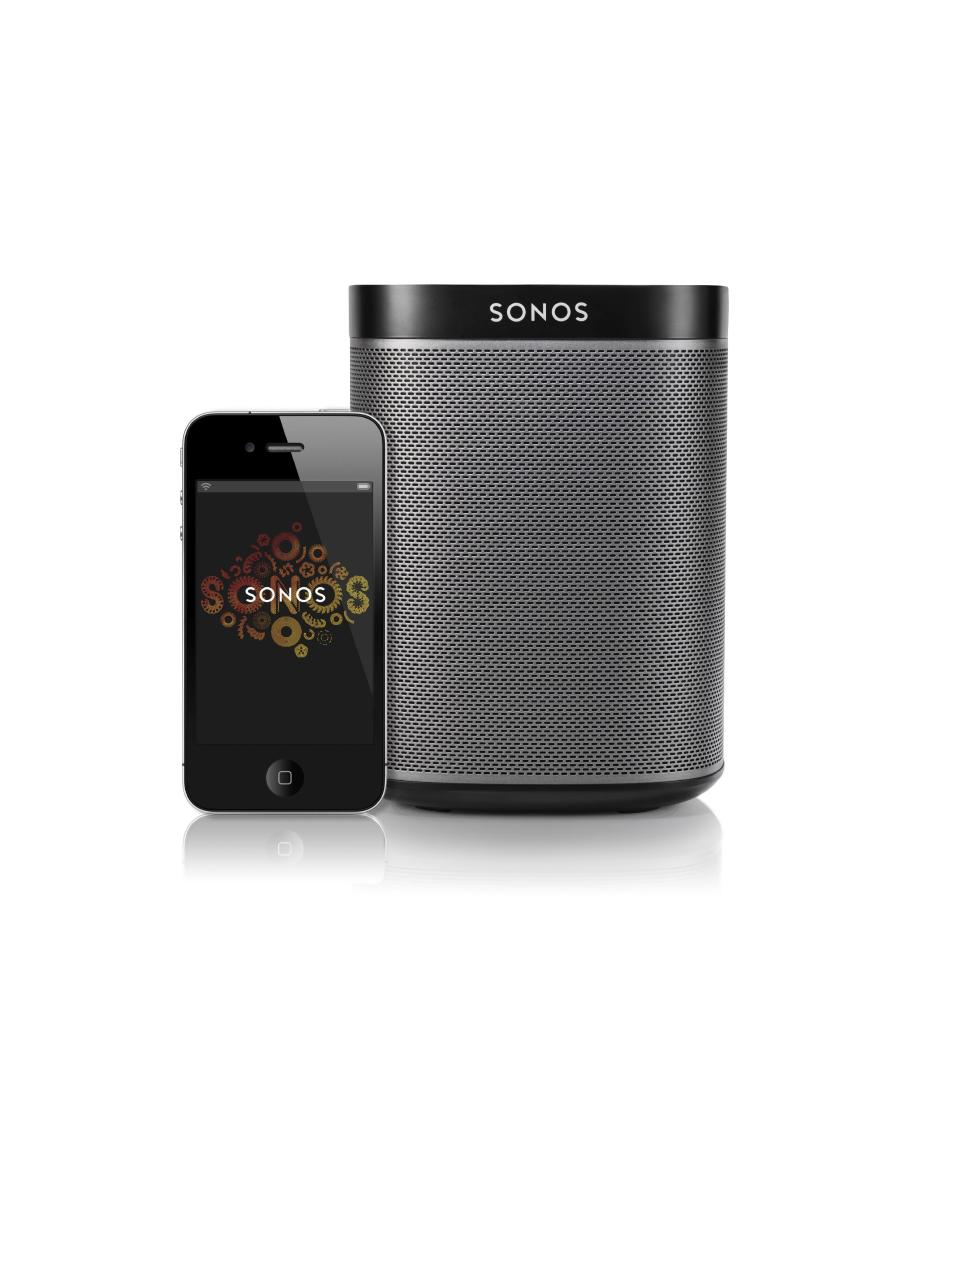 This photo provided by Sonos shows an iPhone and Sonos Black Play 1. Sonos speakers run over Wi-Fi and need to be plugged into a power outlet. The speakers are designed to disperse sound in a wide radius and fill a room with sound. (AP Photo/Sonos)